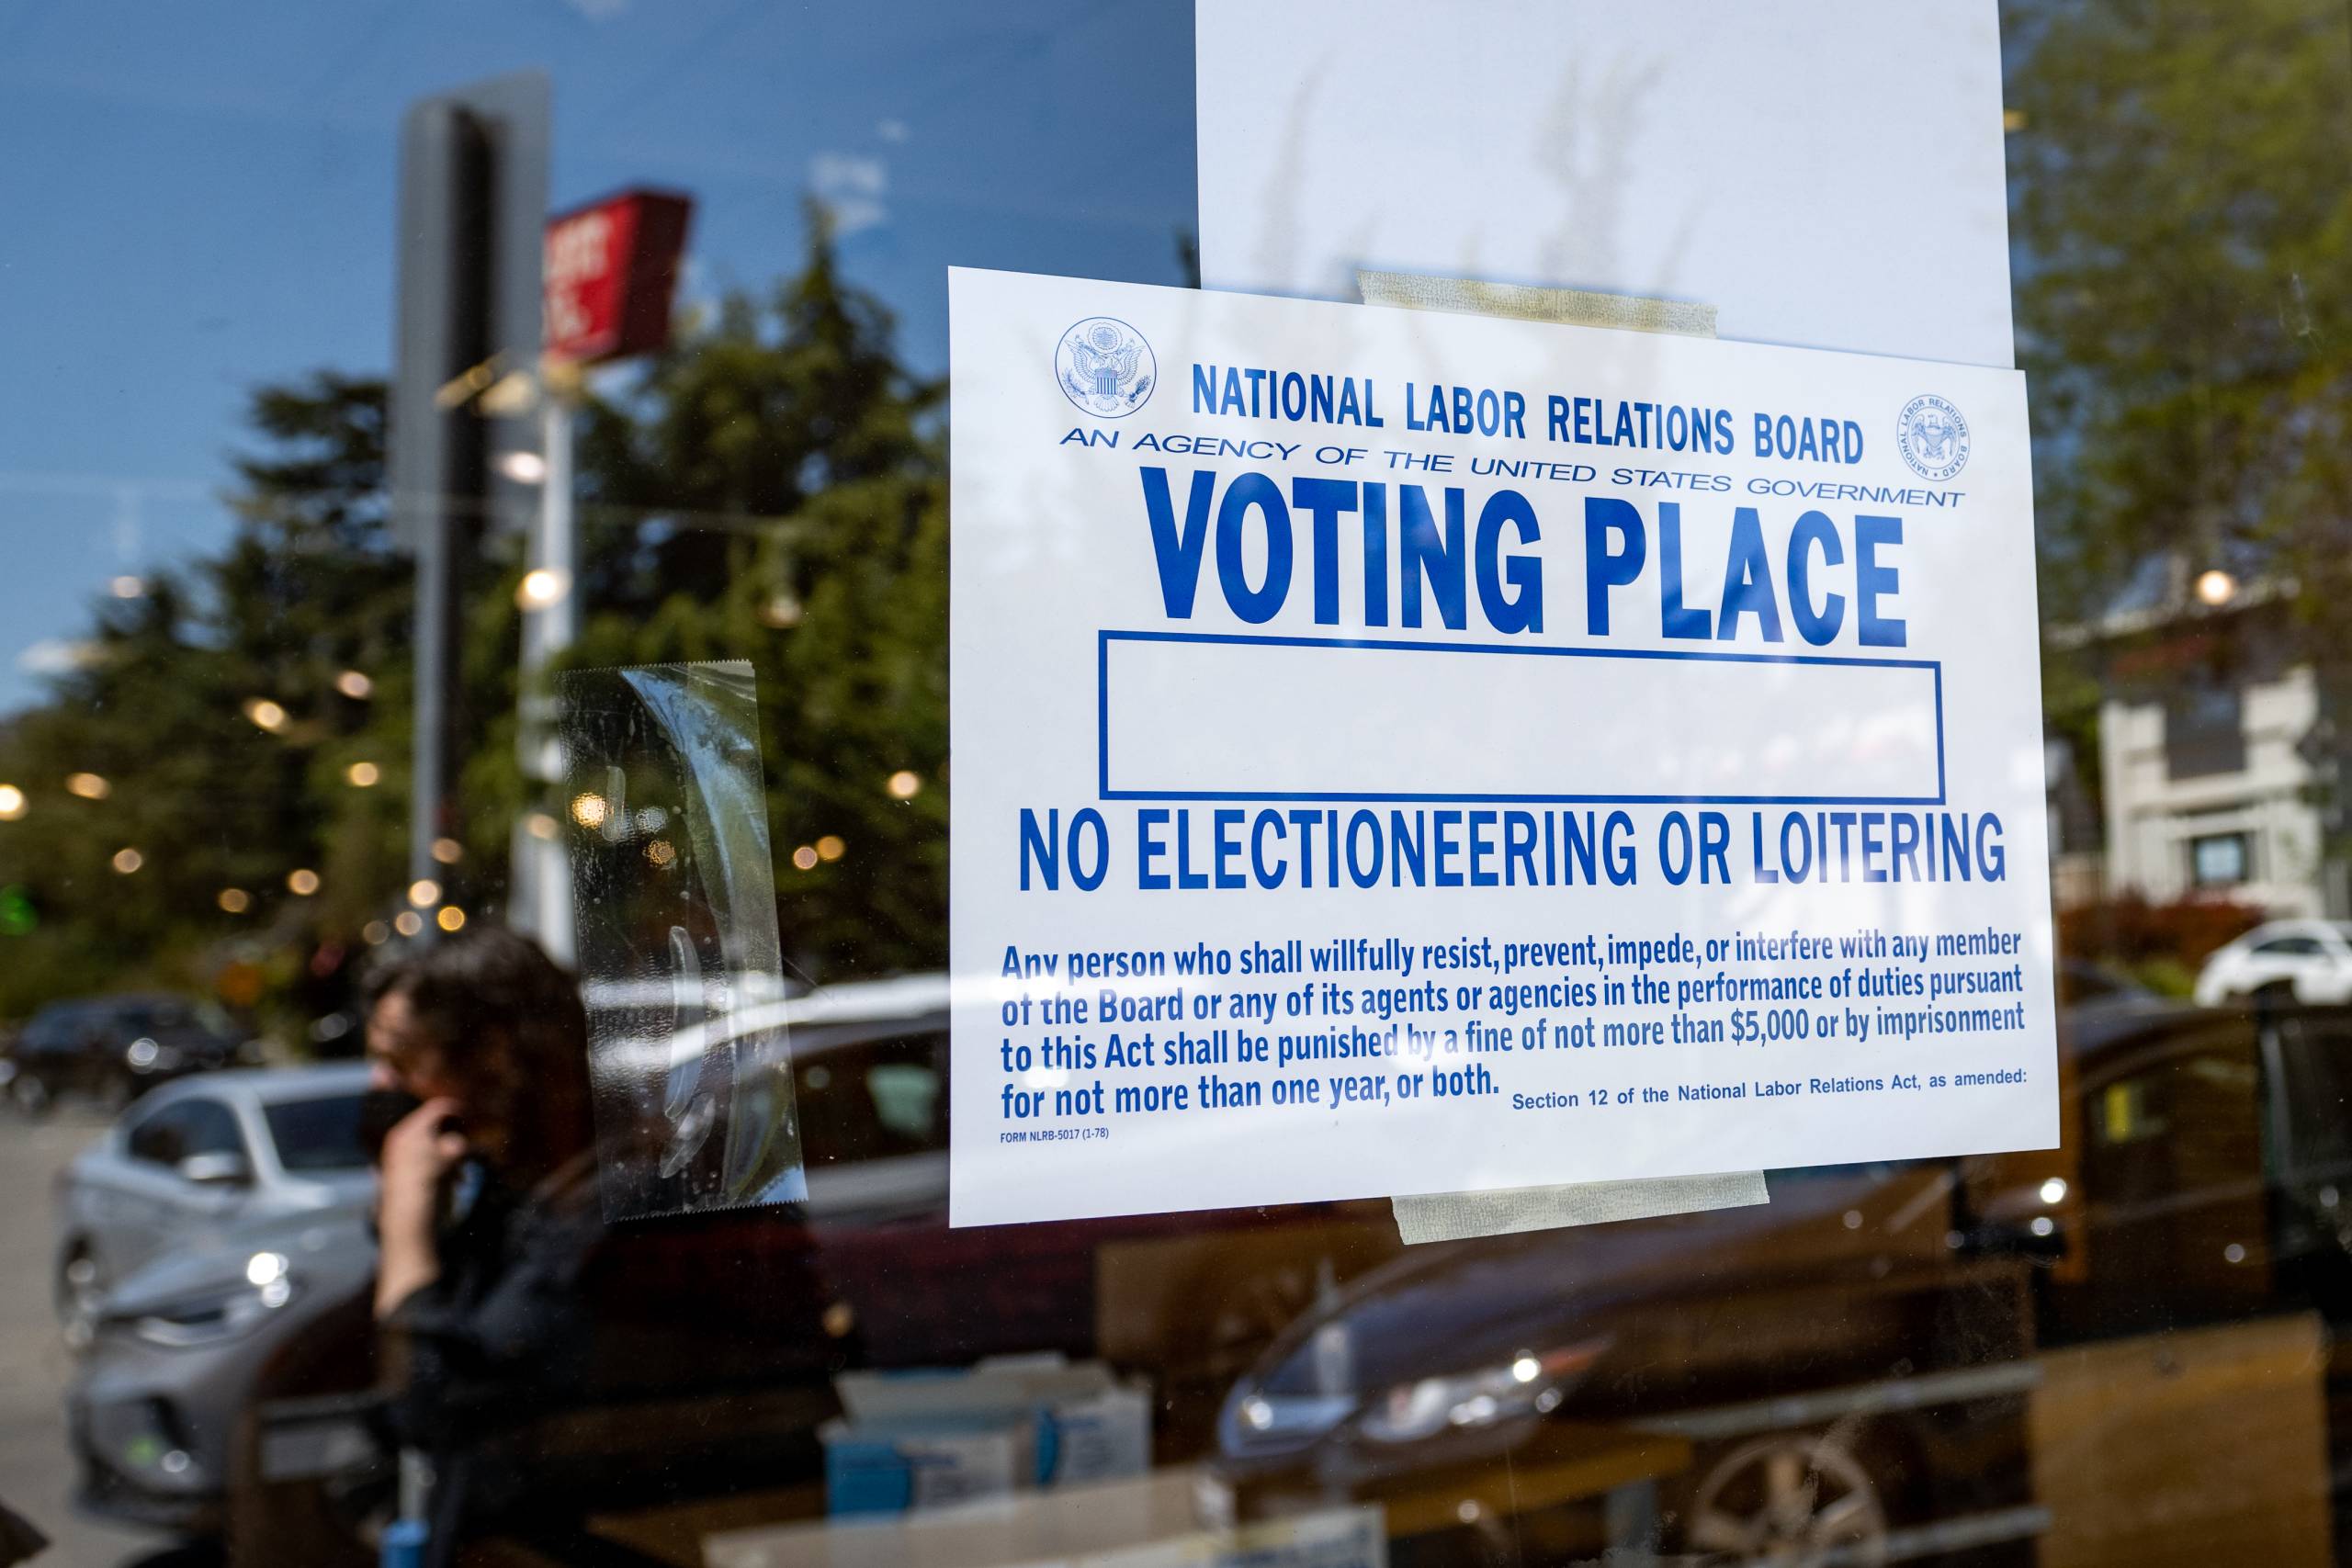 A sign up in a window that says "Voting Place"